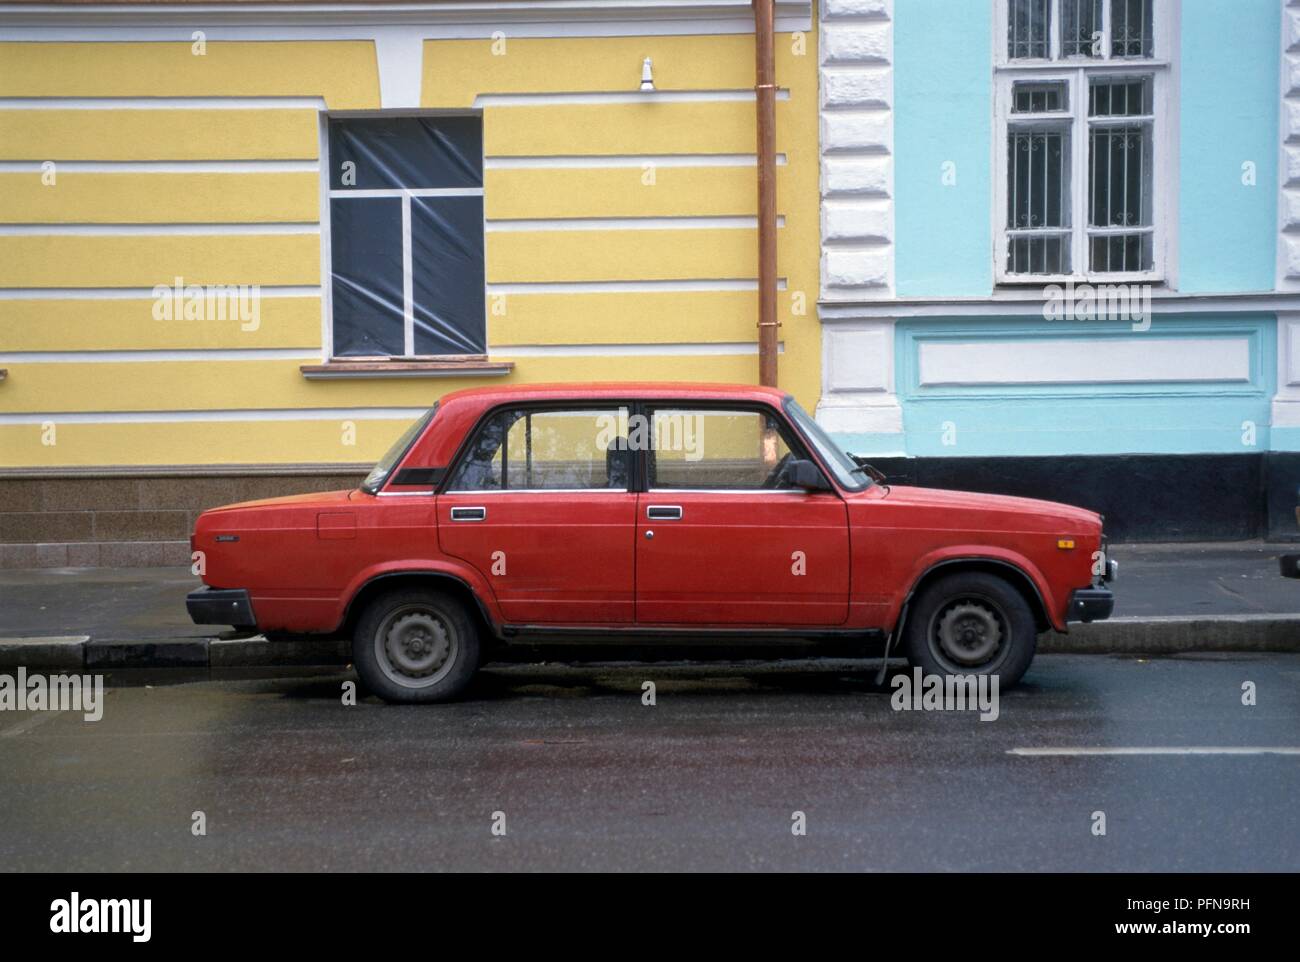 Russia, Moscow, side view of a red Lada car parked in the street Stock Photo